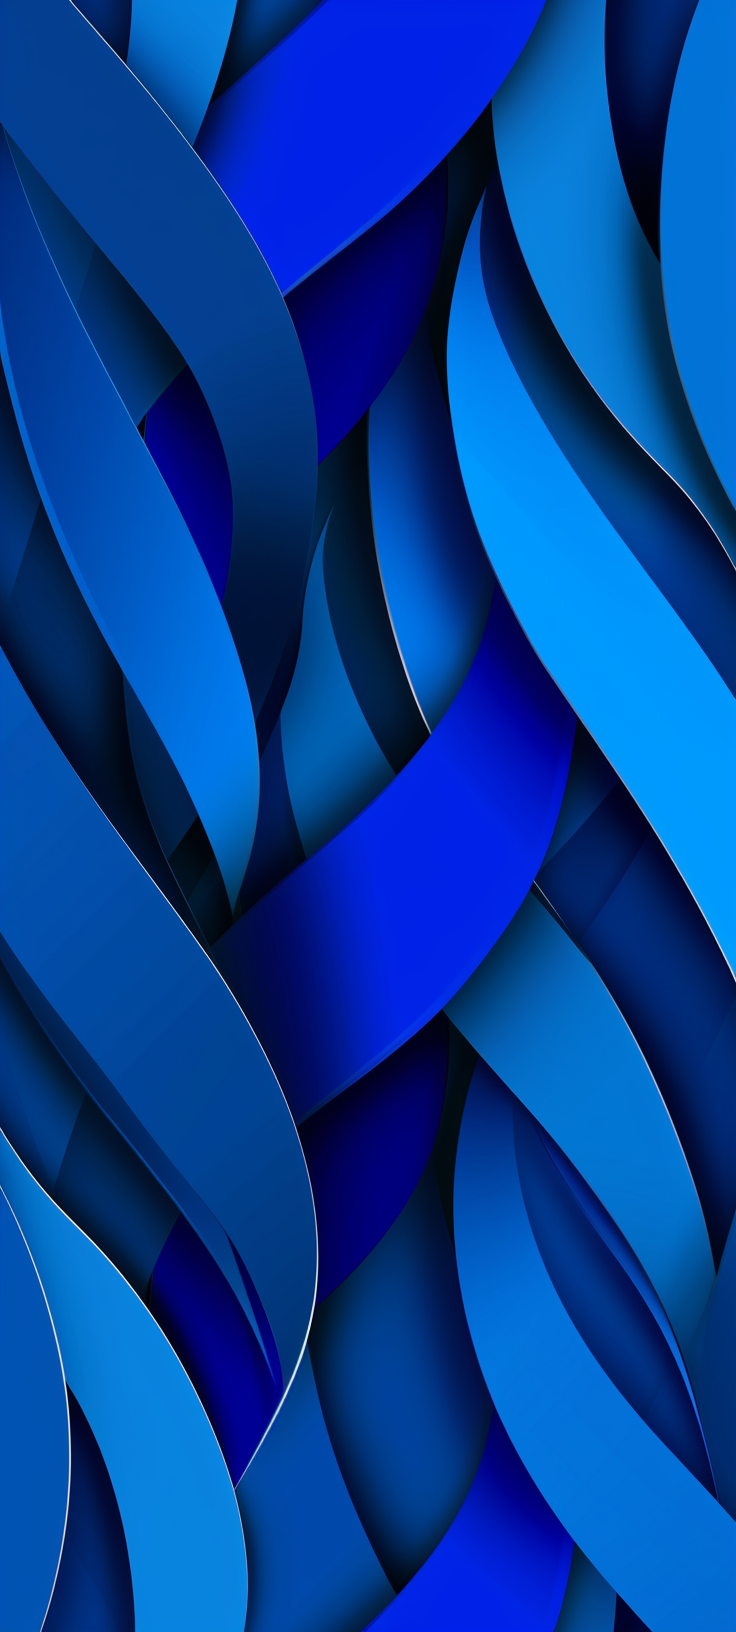 Blue_background_wallpaper_black_hd_in_the_style_of_l_53938830-15c4-429b-a623-75cb6a44af76.png